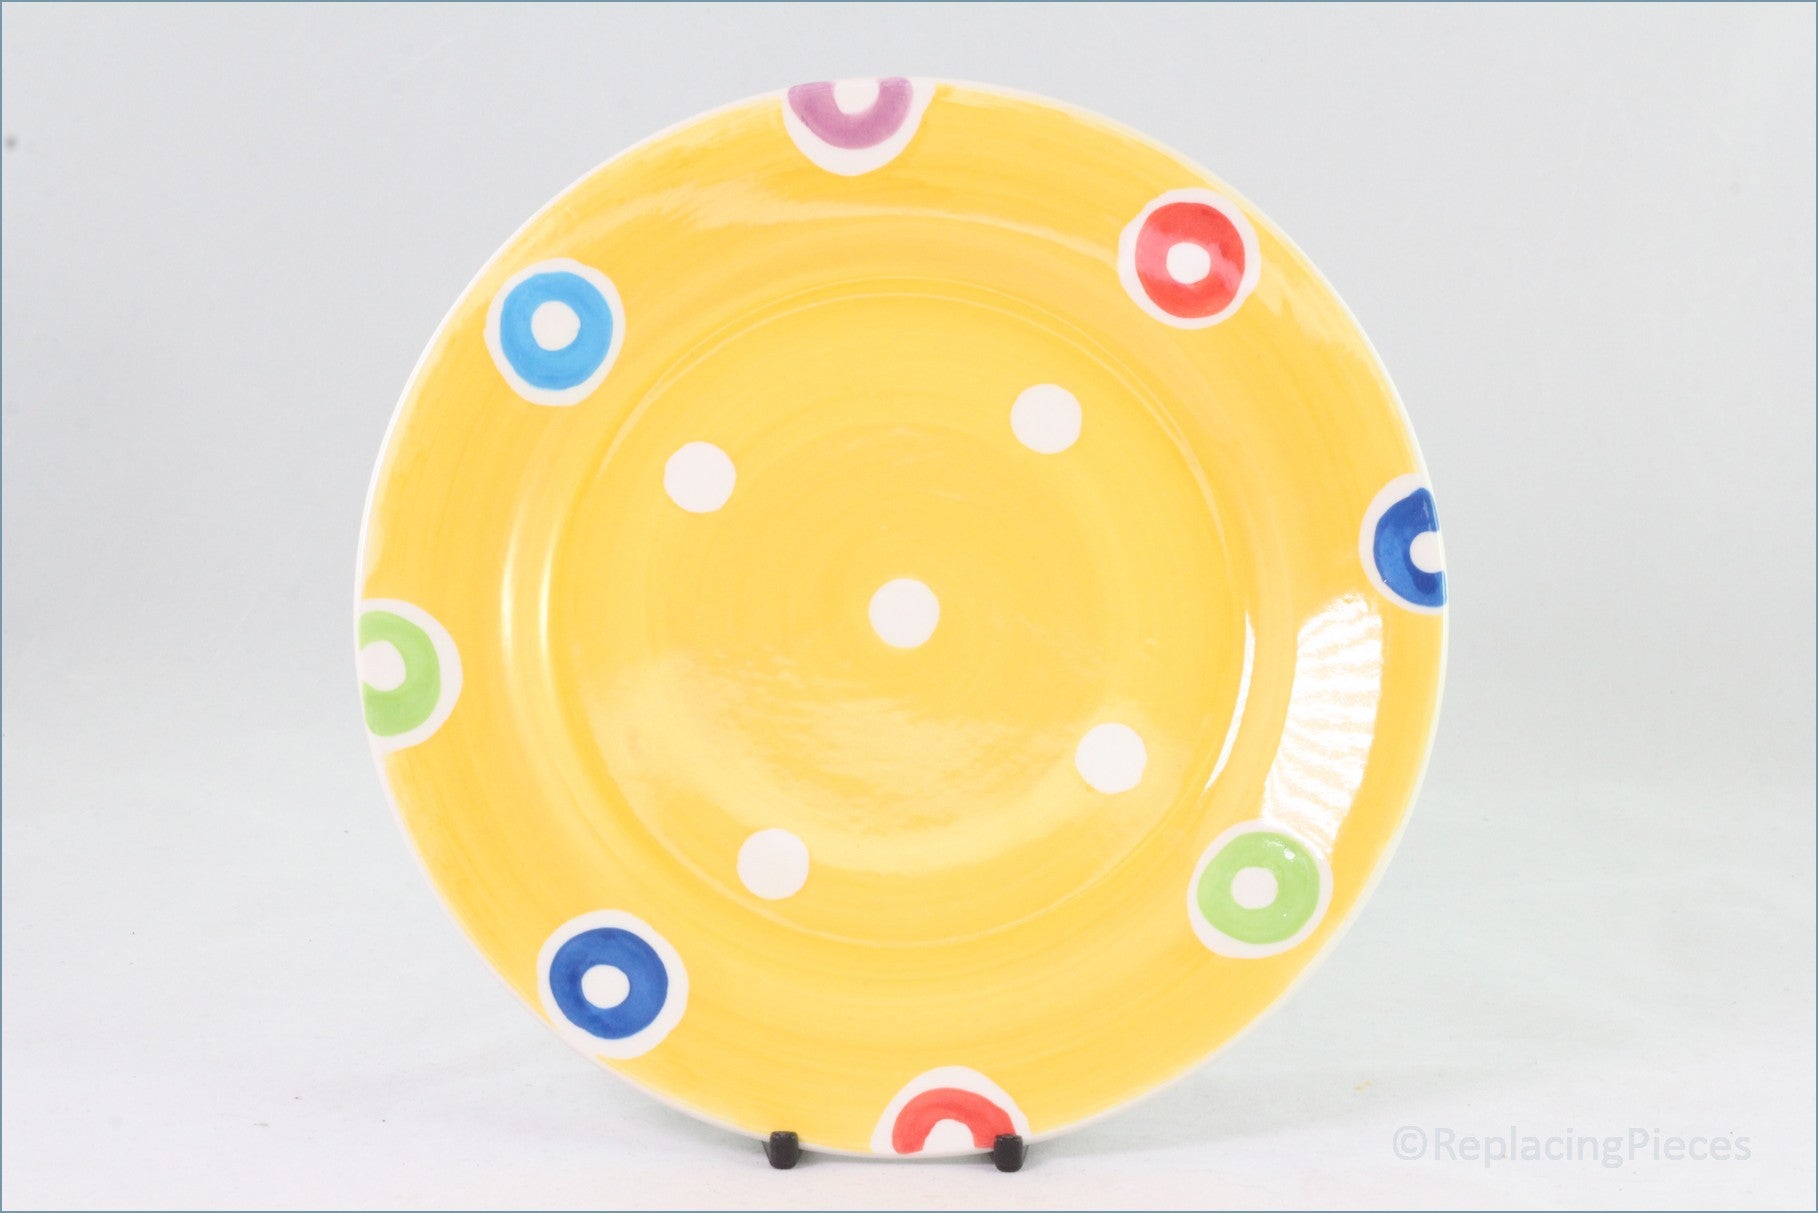 RPW174 - Whittards - 8" Salad Plate (Yellow - Multi Coloured Circles)